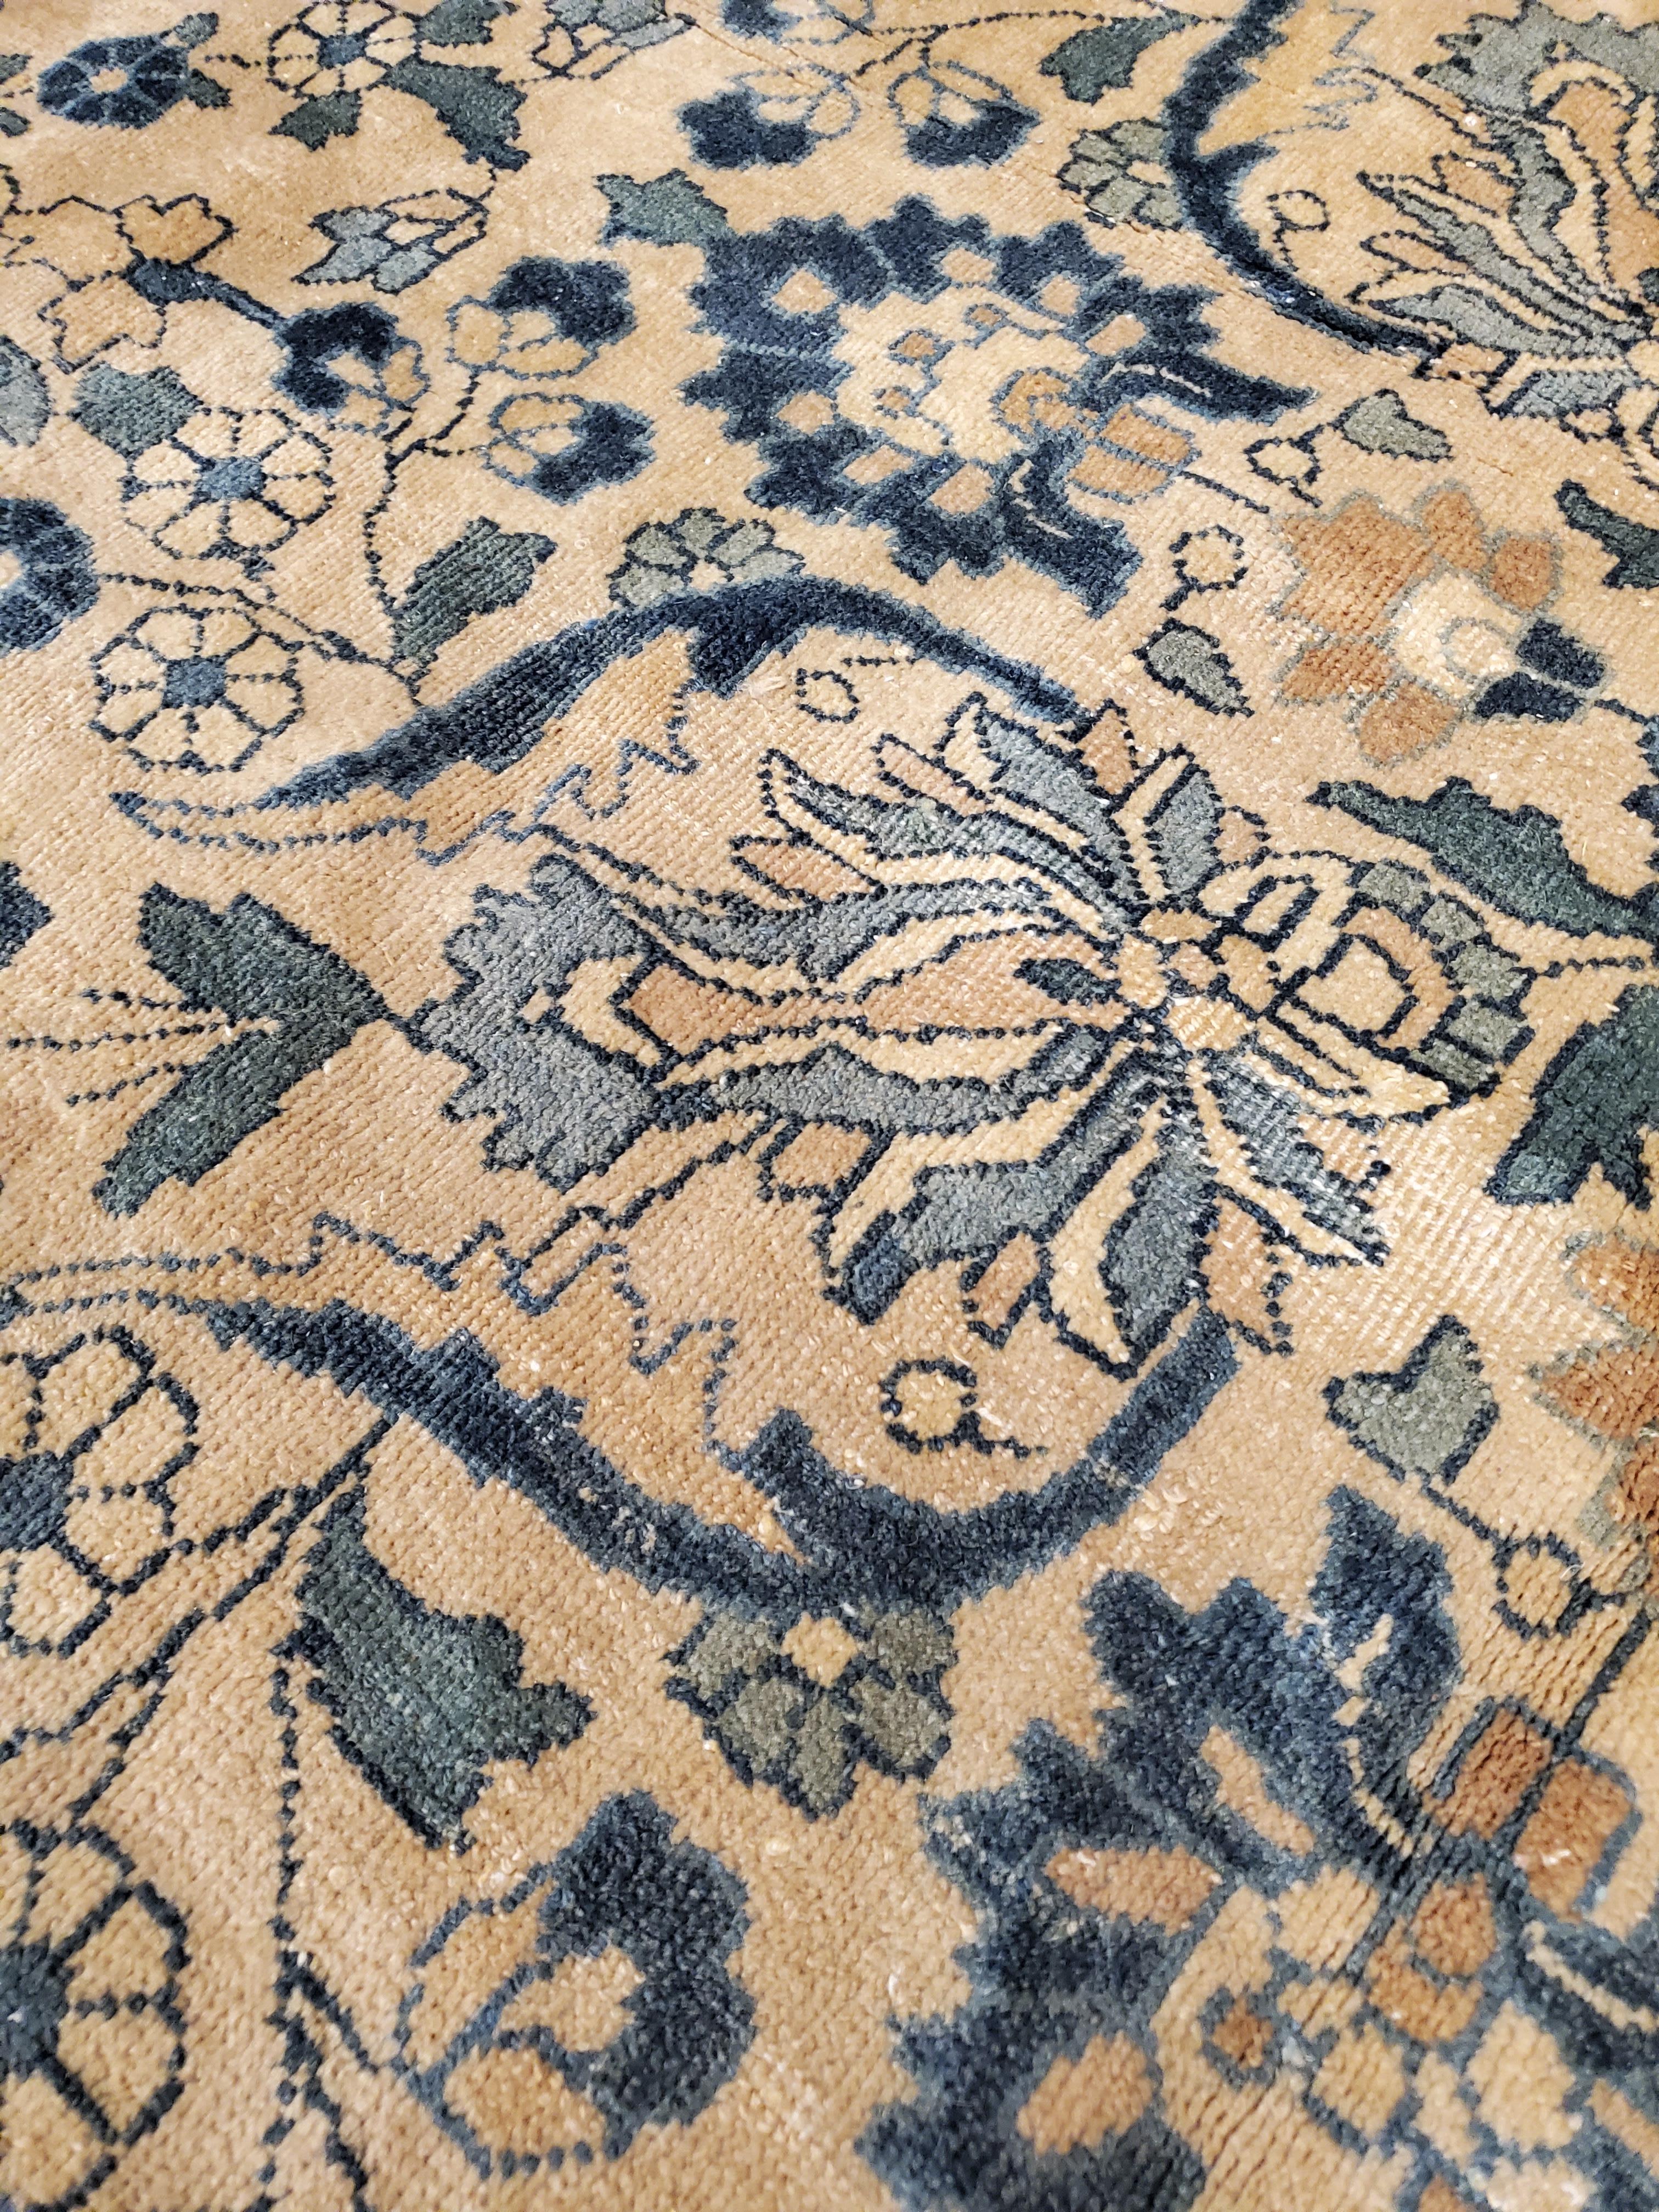 Wool Antique Mashad Persian Carpet, Fine weave, Softs Blues, Beige, Soft Taupe For Sale